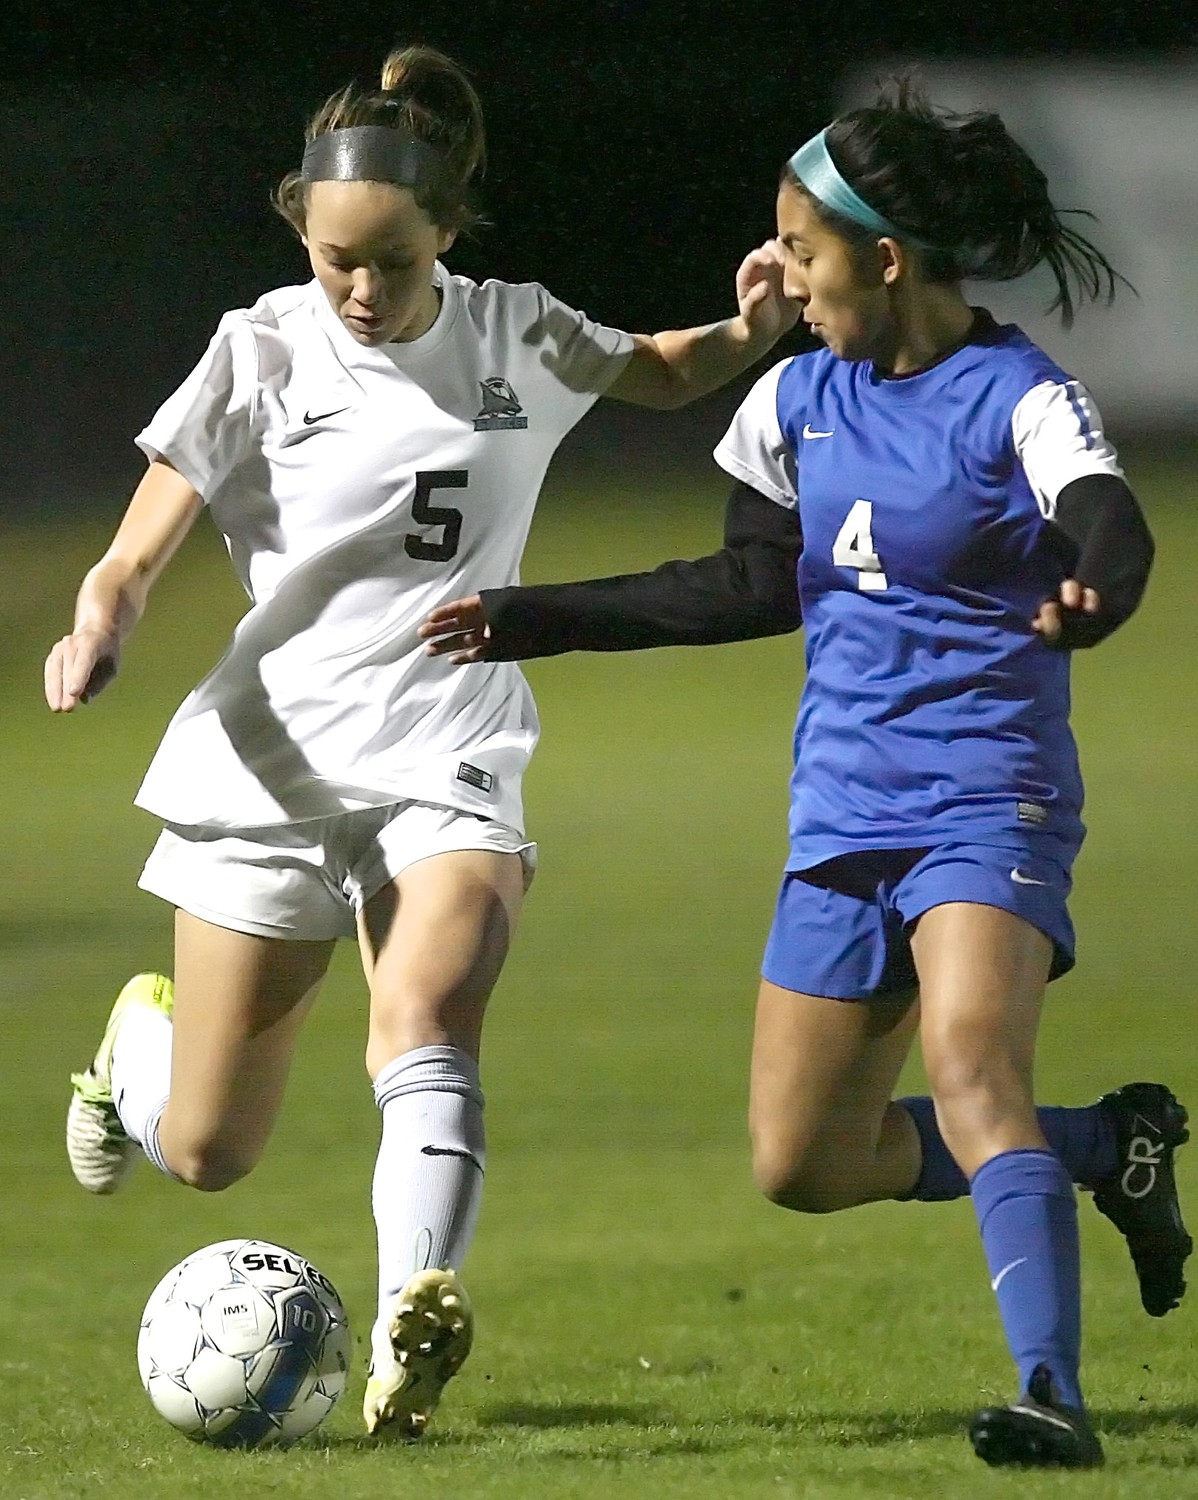 Tatum Taucher (5) of the Sharks crosses the ball to a teammate. Taucher scored one goal in the Clay win.